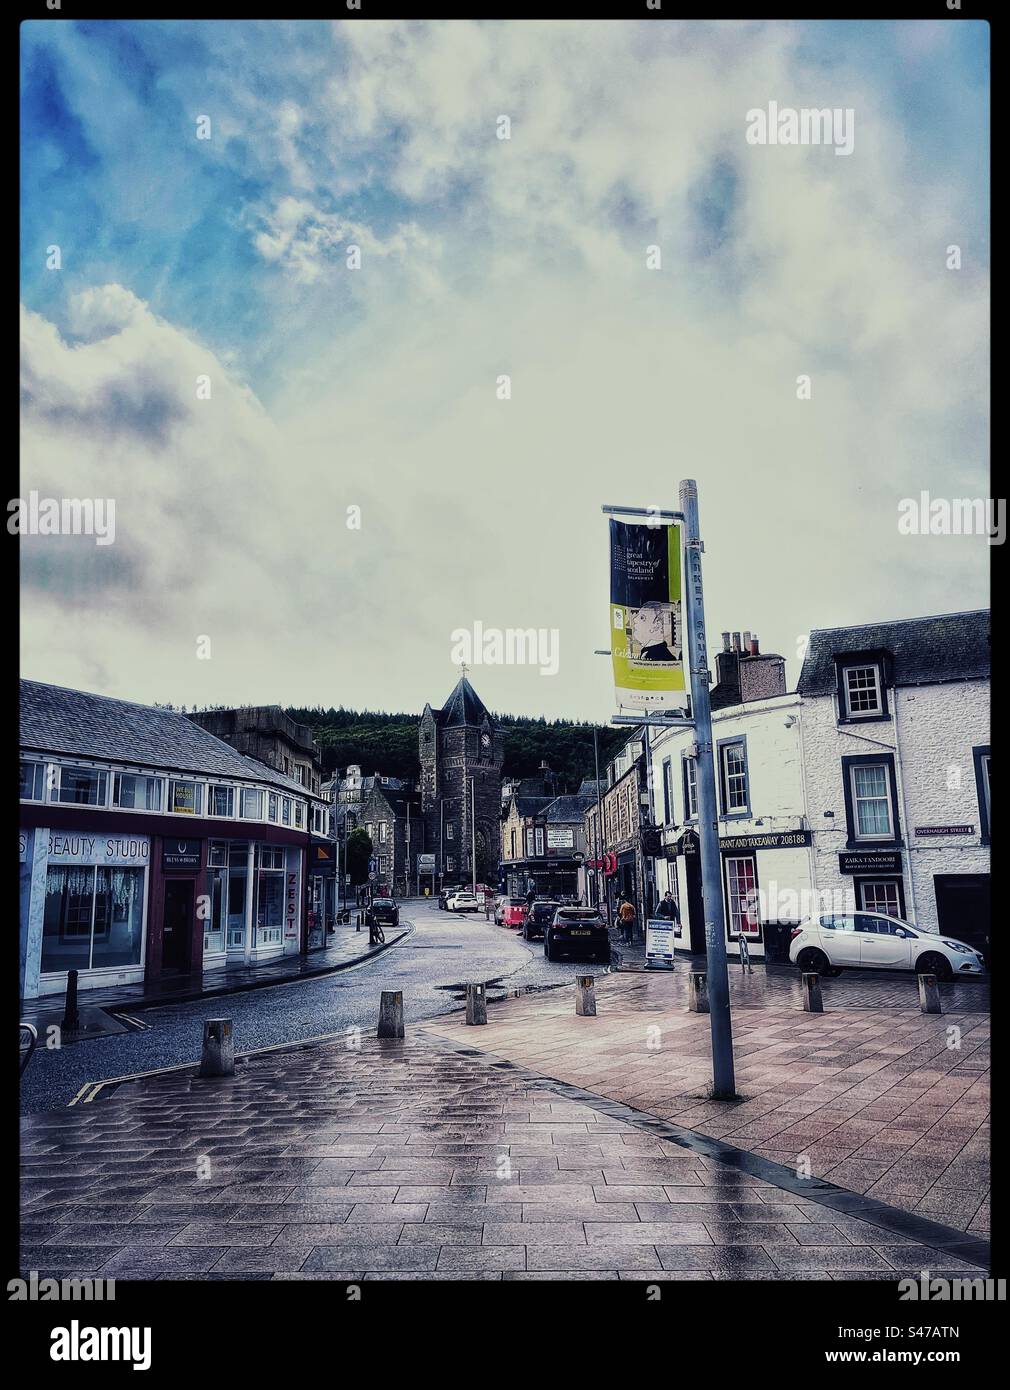 Galashiels town centre on a wet day with the town clock and war memorial. Stock Photo